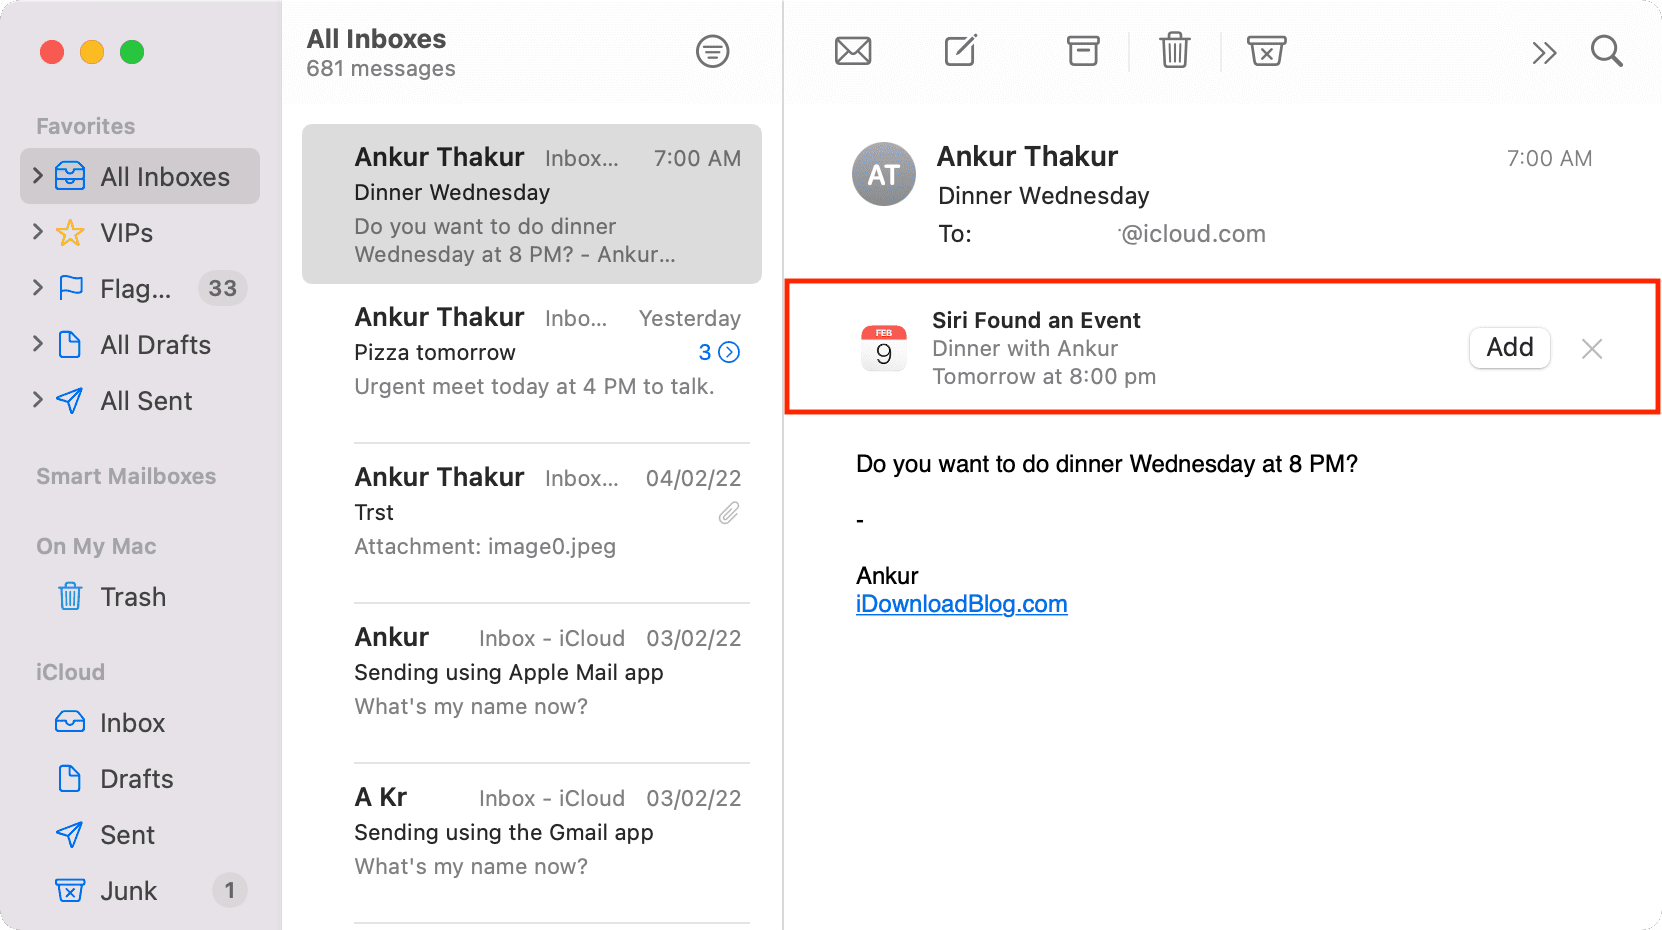 Siri Found an Event in Mail app on Mac